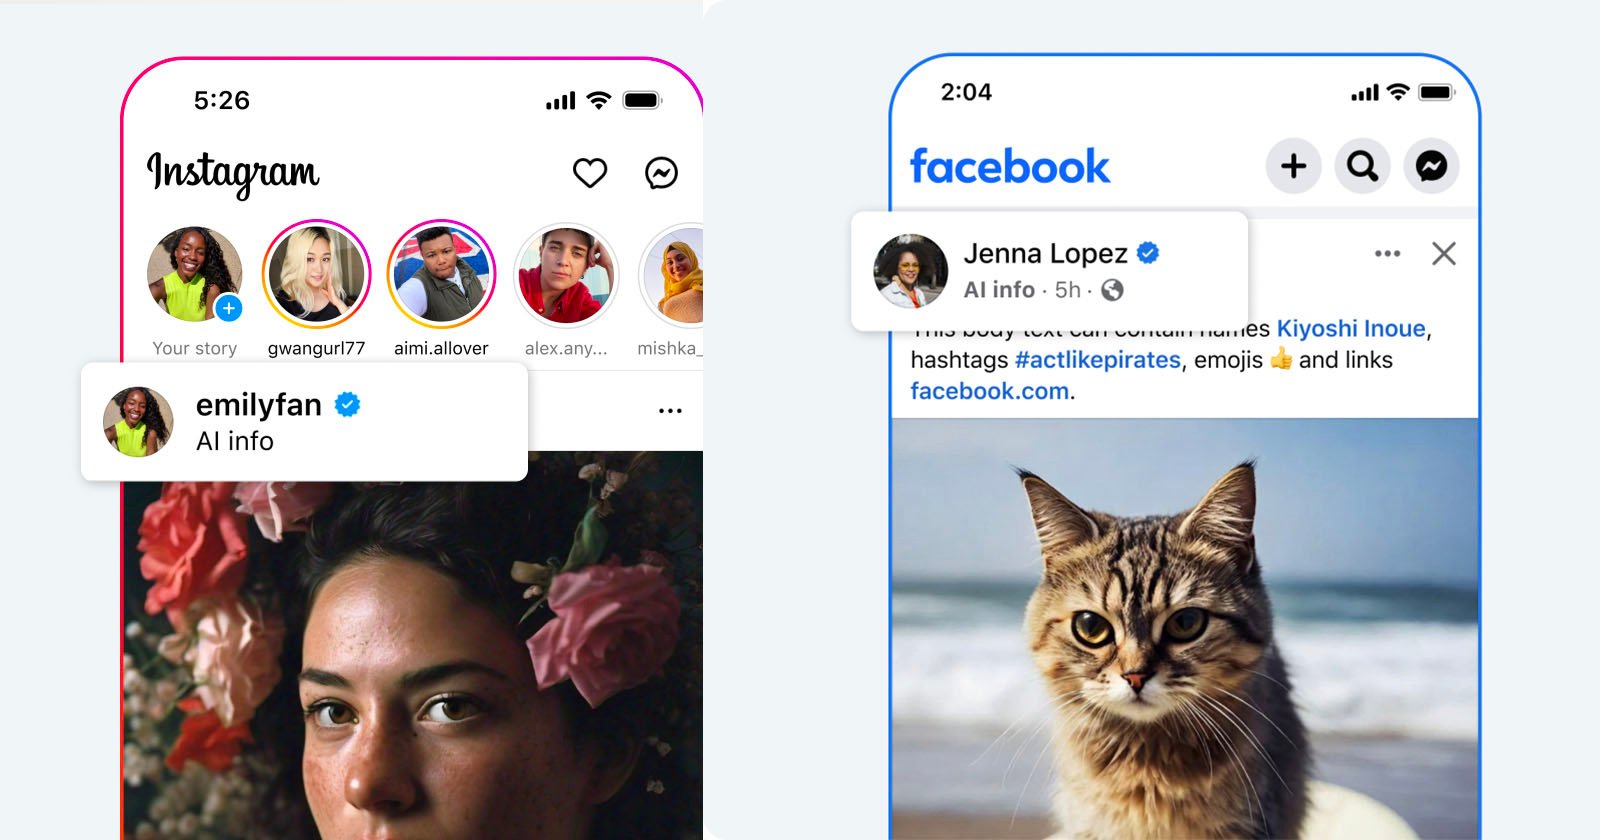 The image shows two social media user interfaces side-by-side. The left screen displays an Instagram feed with stories and a highlighted profile named "emilyfan." The right screen shows a Facebook post by "Jenna Lopez," featuring a photo of a cat in front of a beach.